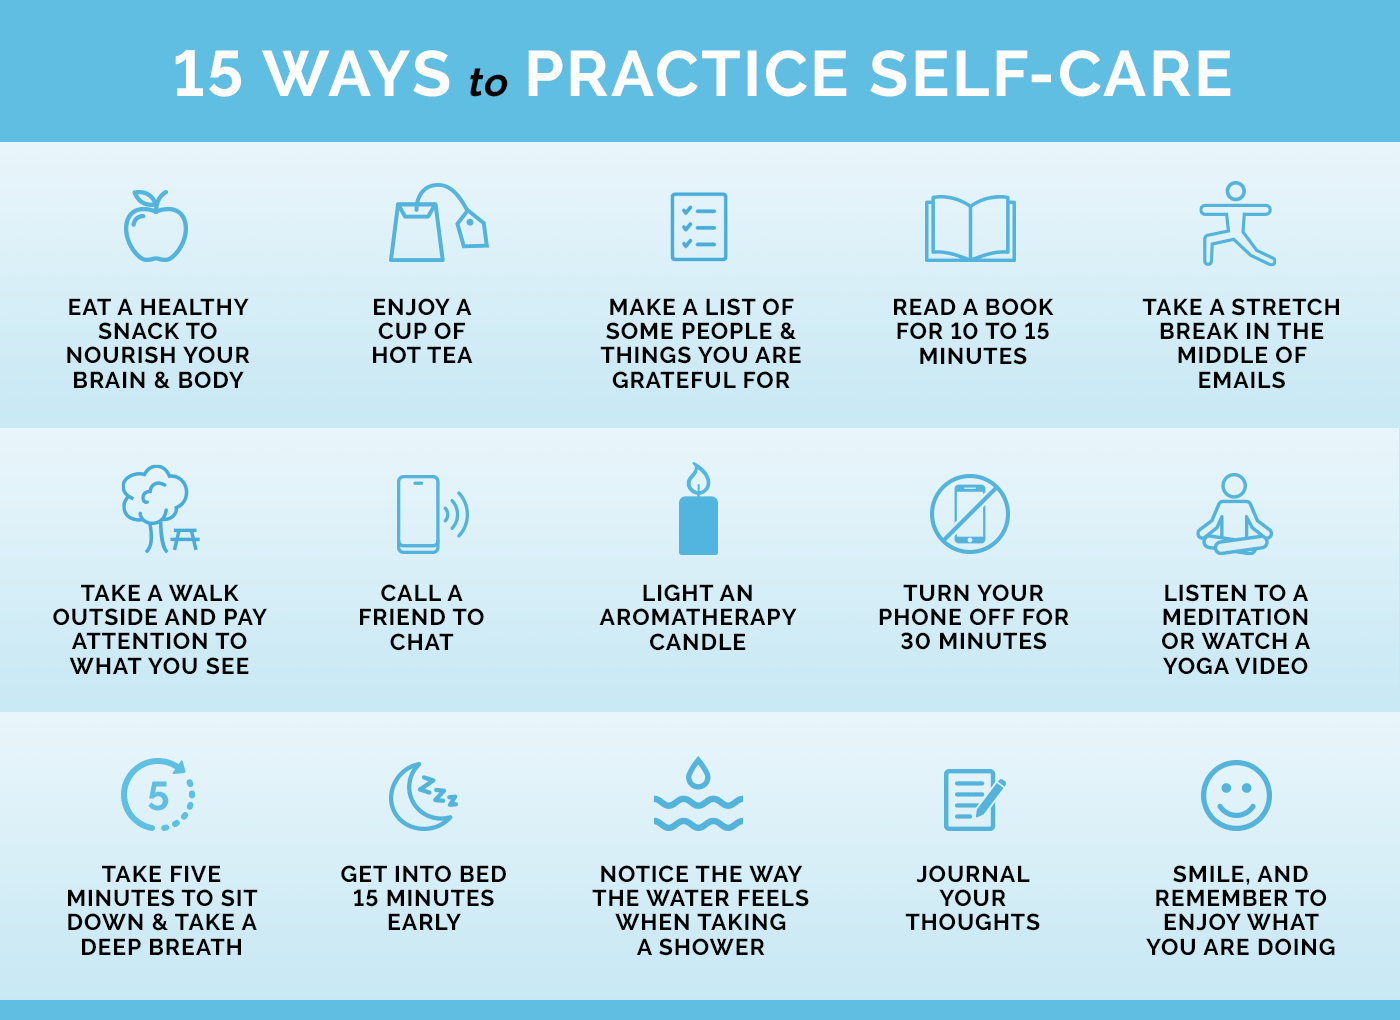 self-care tips during COVID-19